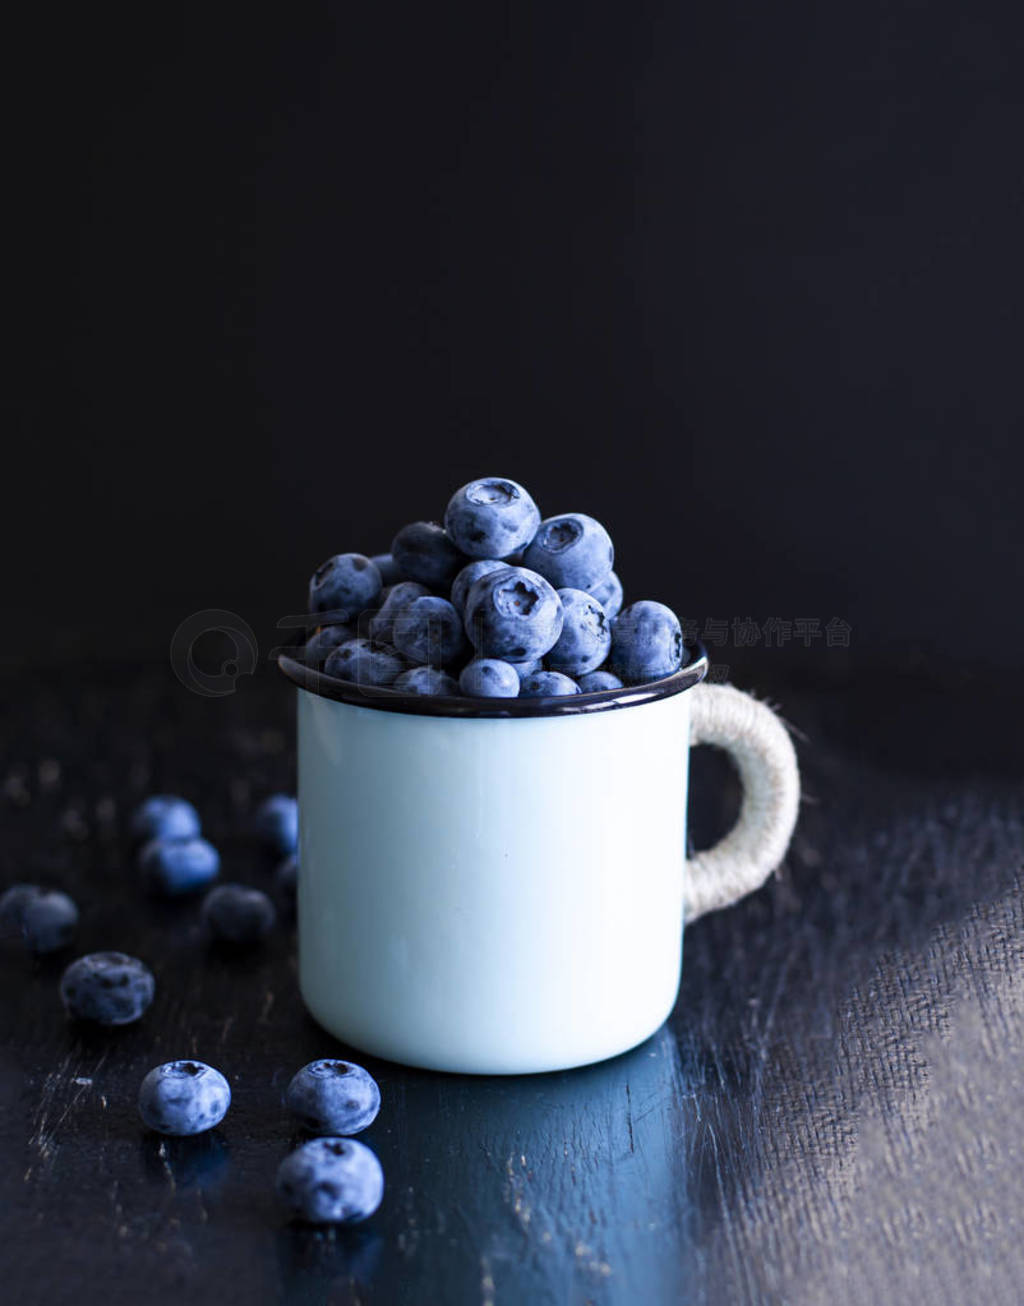 A tasty and healthy snack: juicy and sweet blueberries